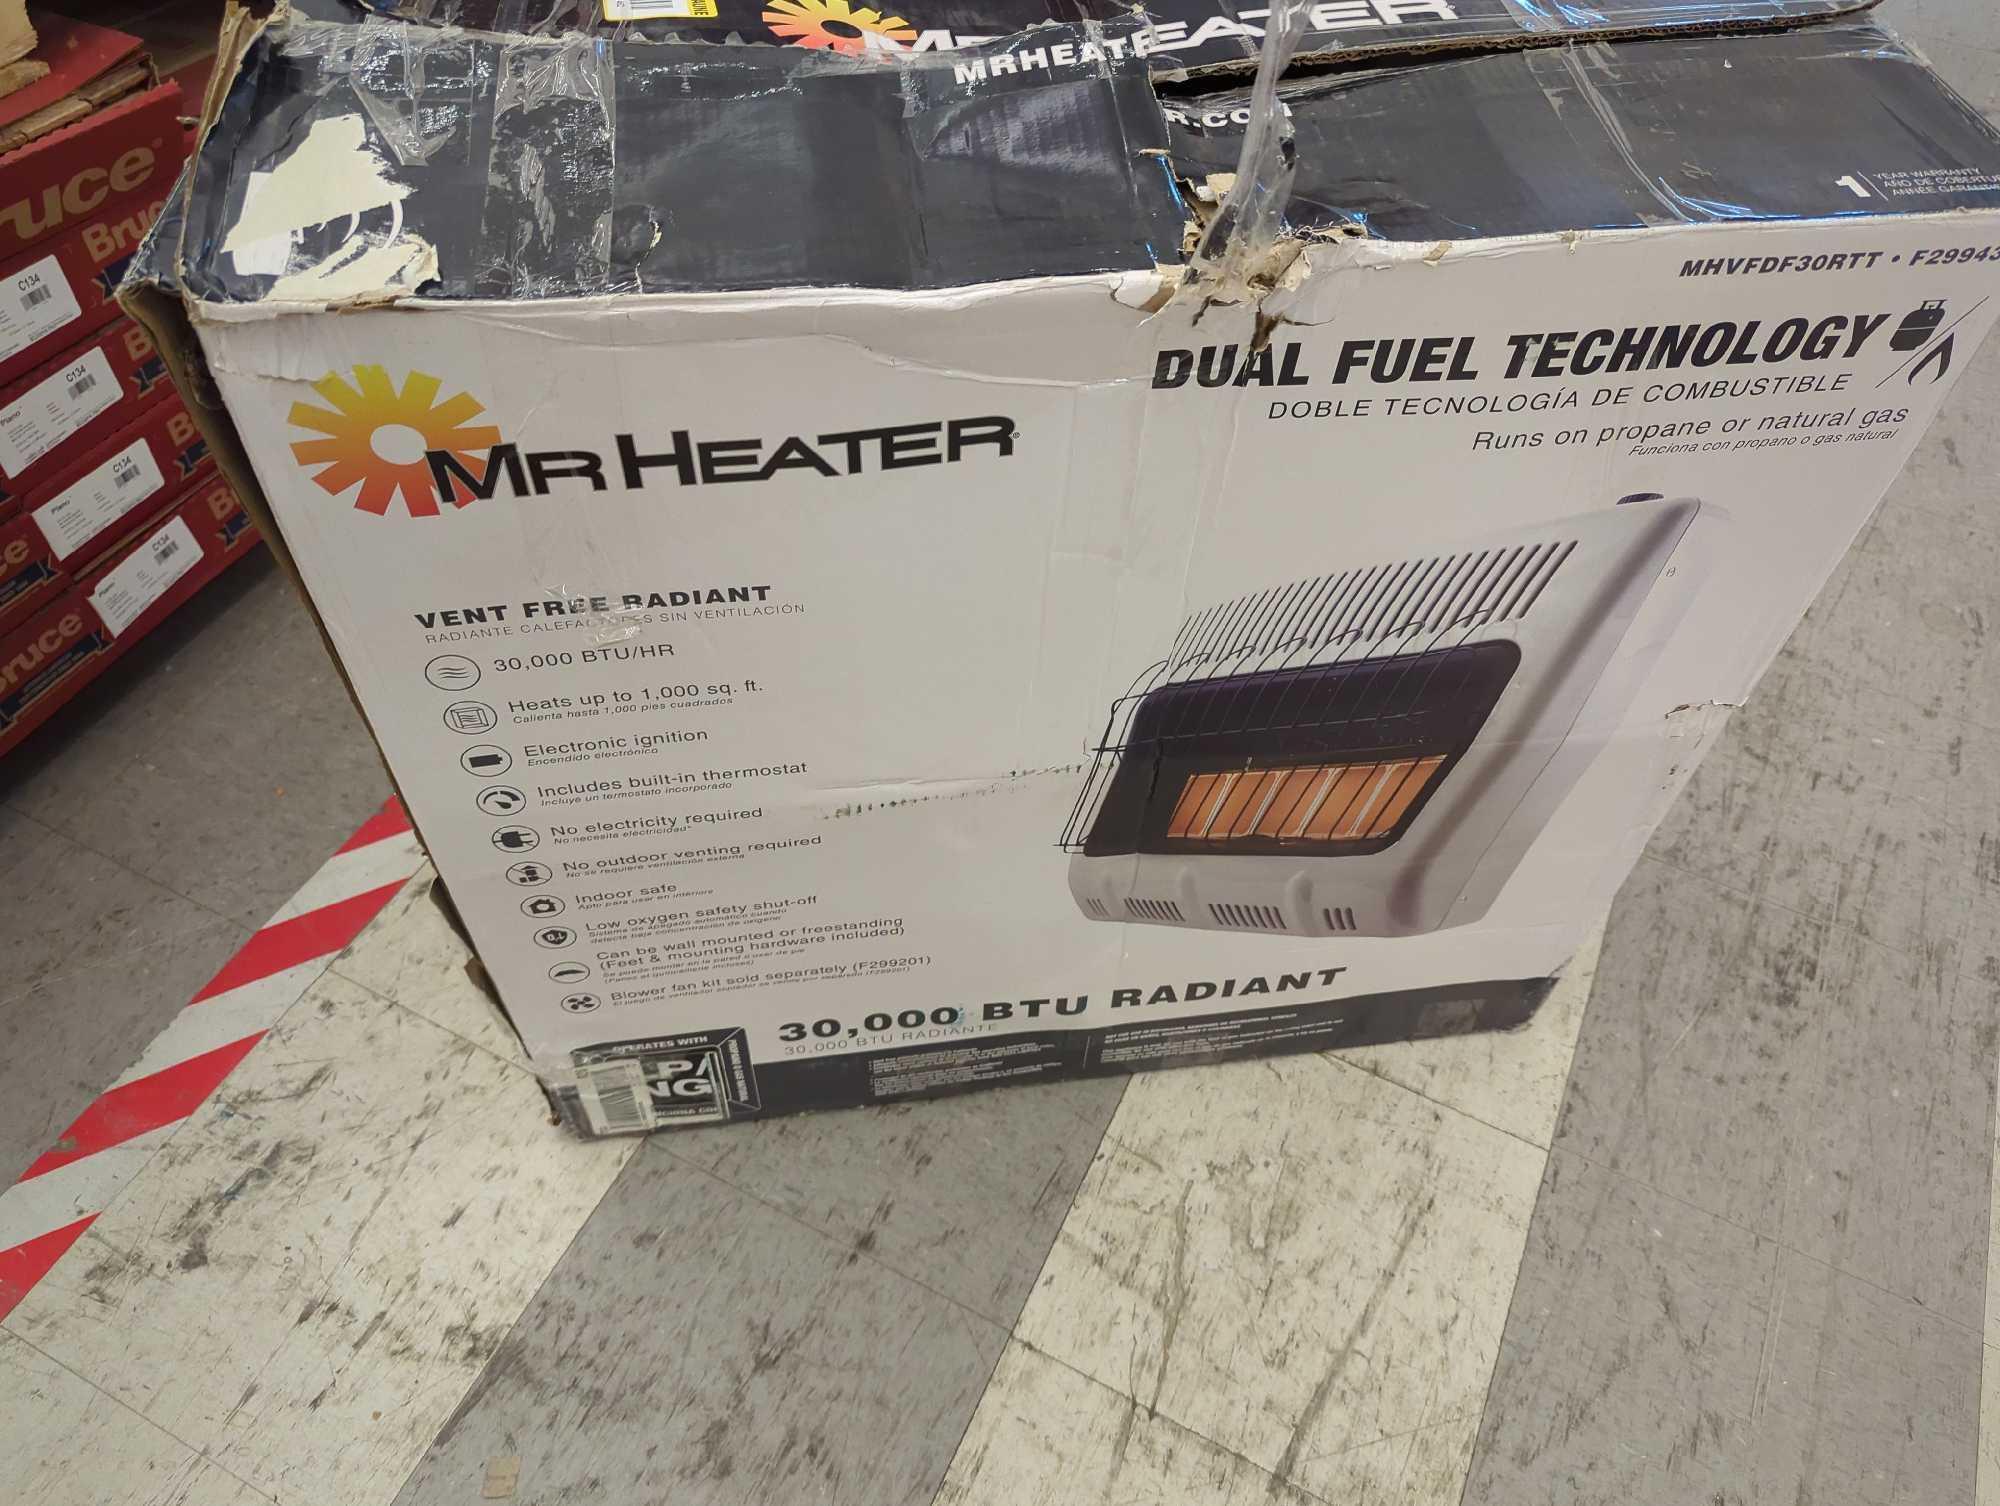 Mr. Heater 30,000 BTU Vent Free Radiant Natural Gas or Propane Dual Fuel Space Heater, Retail Price